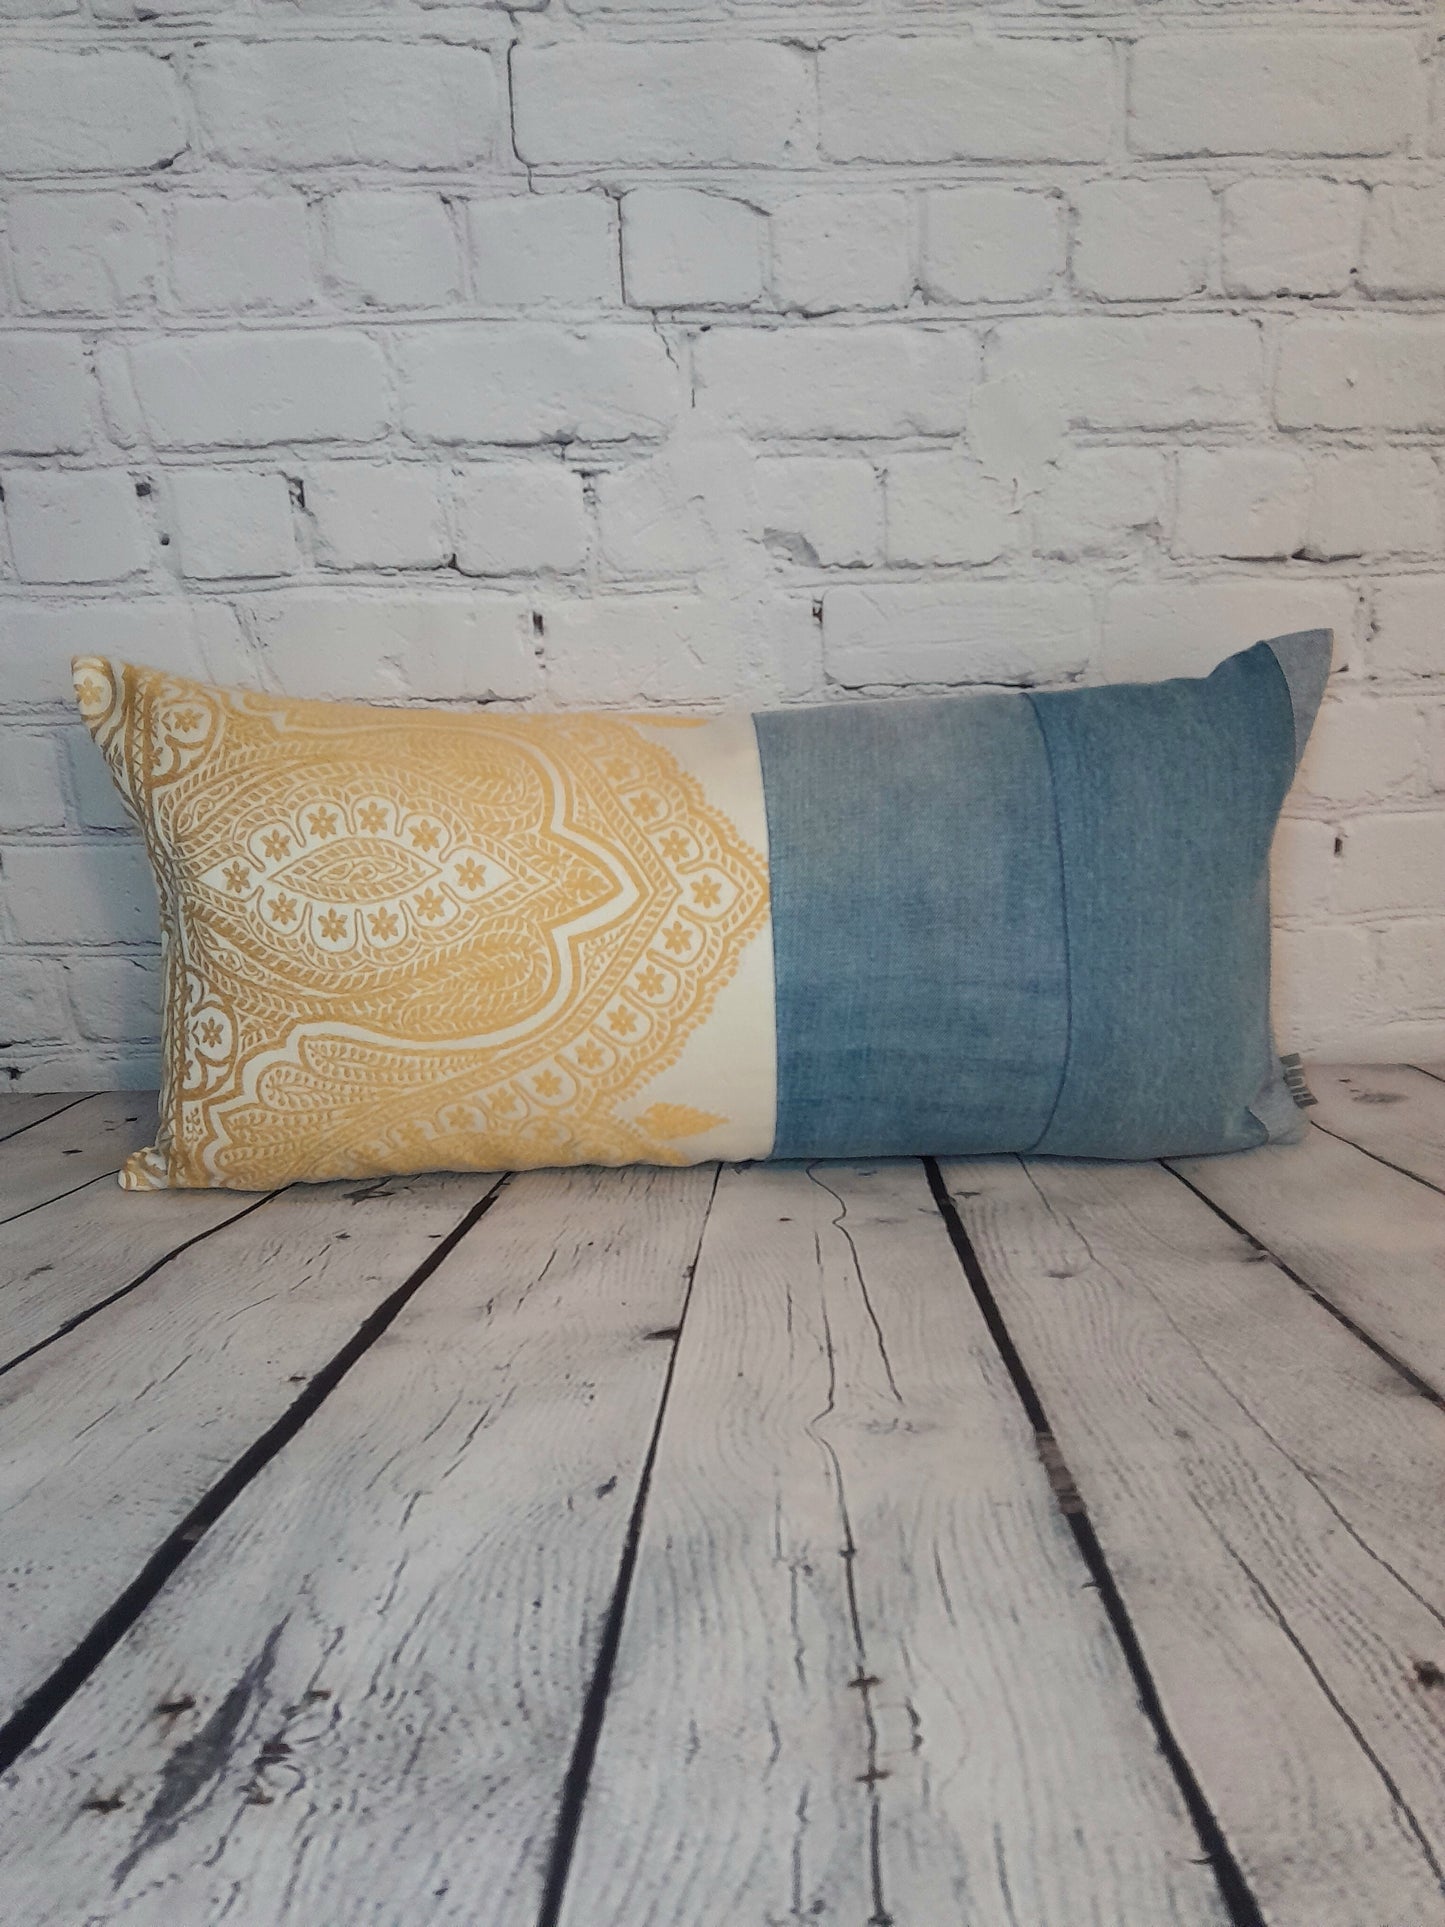 Upcycled luxury cushion. Quality handmade homeware.  Blue denim and yellow embroidered cushion, bolster, throw pillow cover.